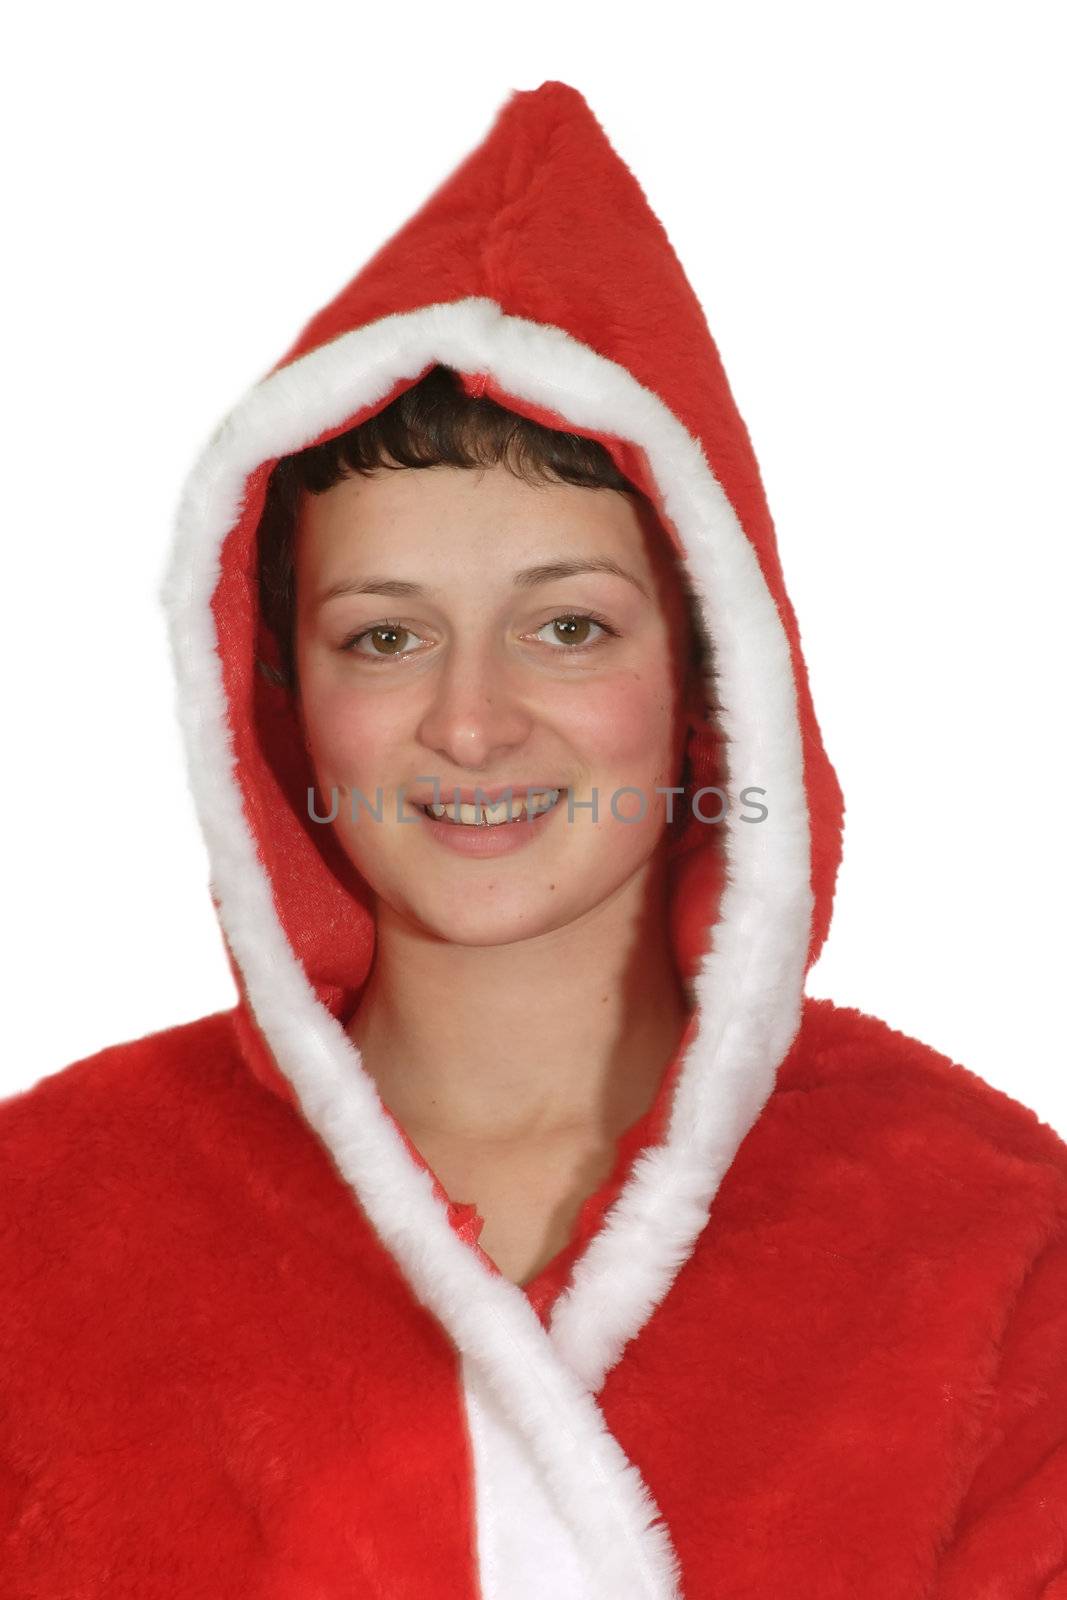 Smiling young santa girl - isolated on white background